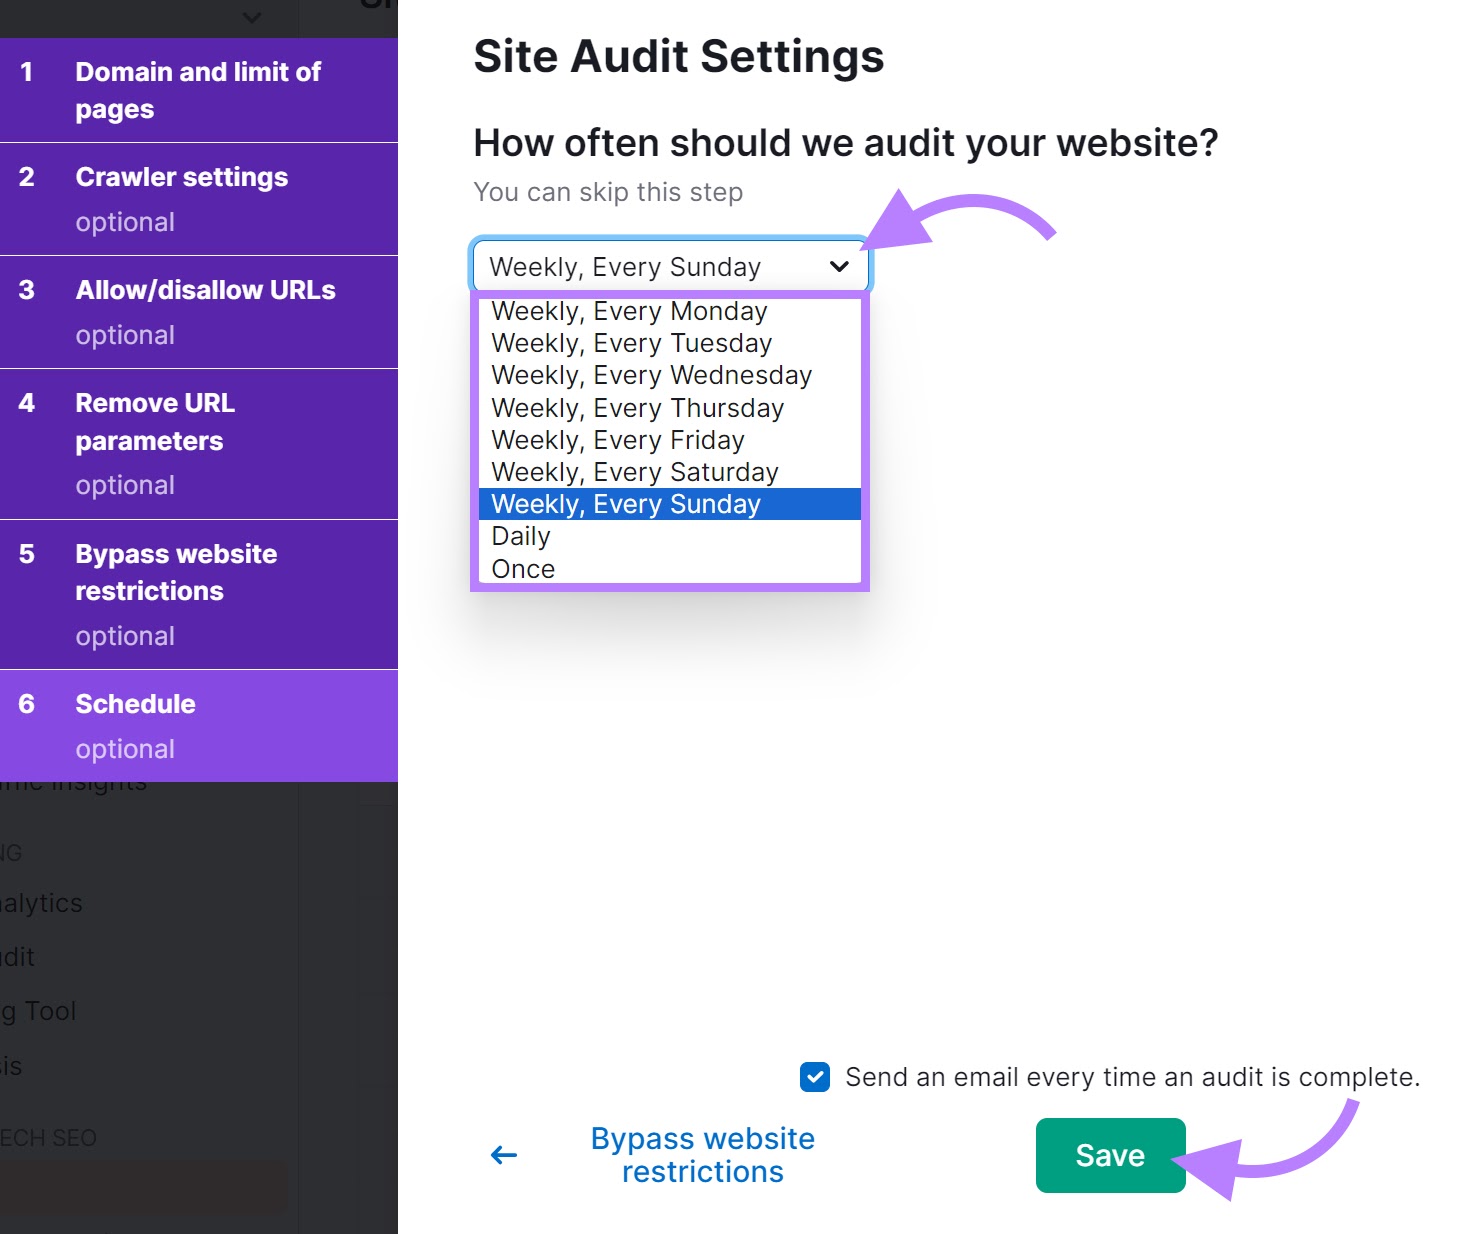 "Schedule" tab of the Site Audit Settings with the schedule drop-down menu open and the "Save" button highlighted.